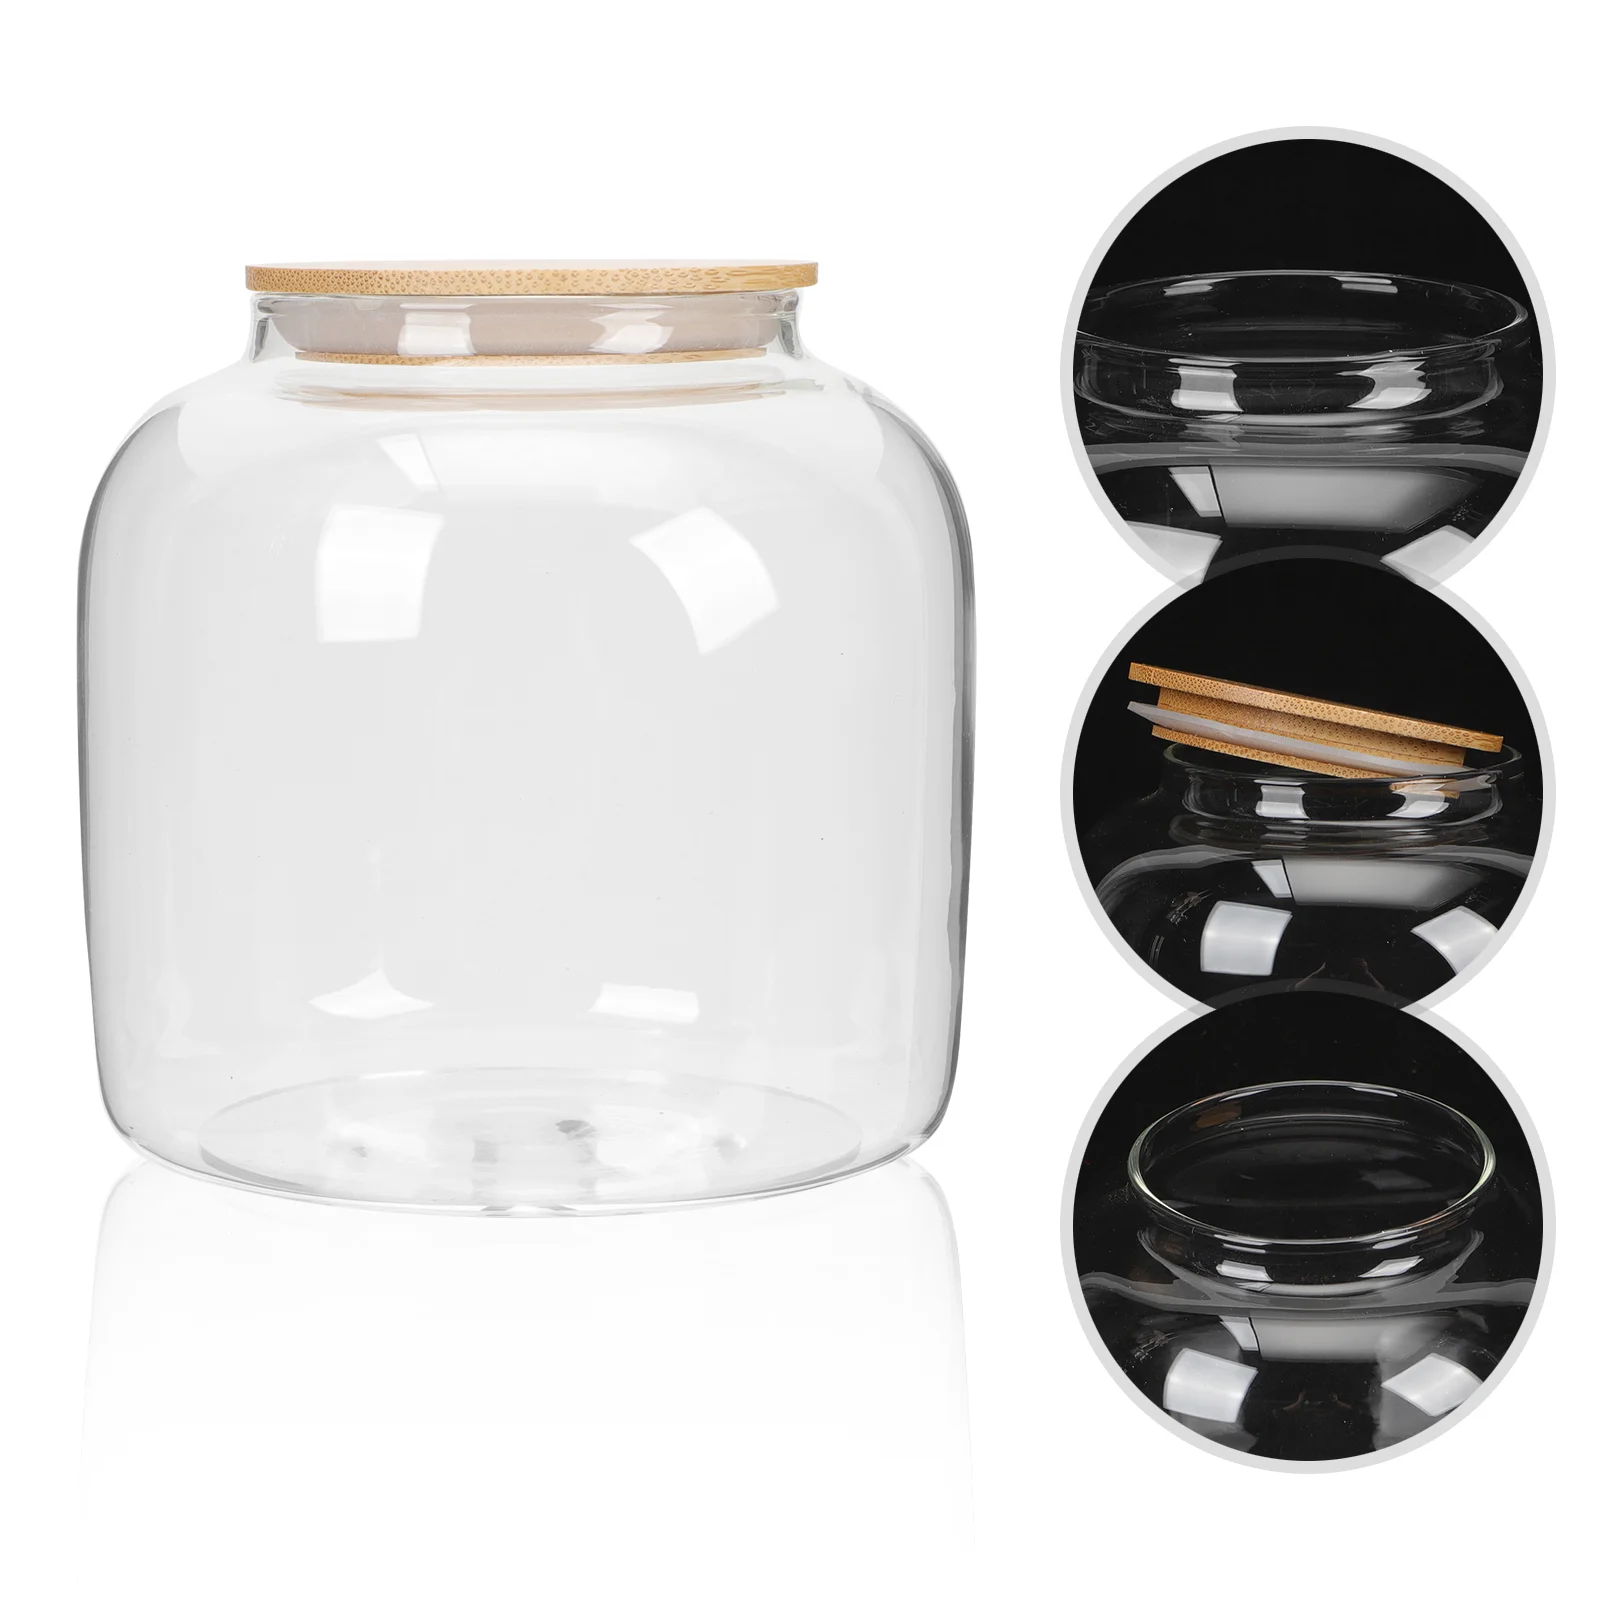 

Glass Tea Large Jar Lid Canister Food Storage Containers Pantry Jars Bamboo Airtight Canisters Make Go Lids